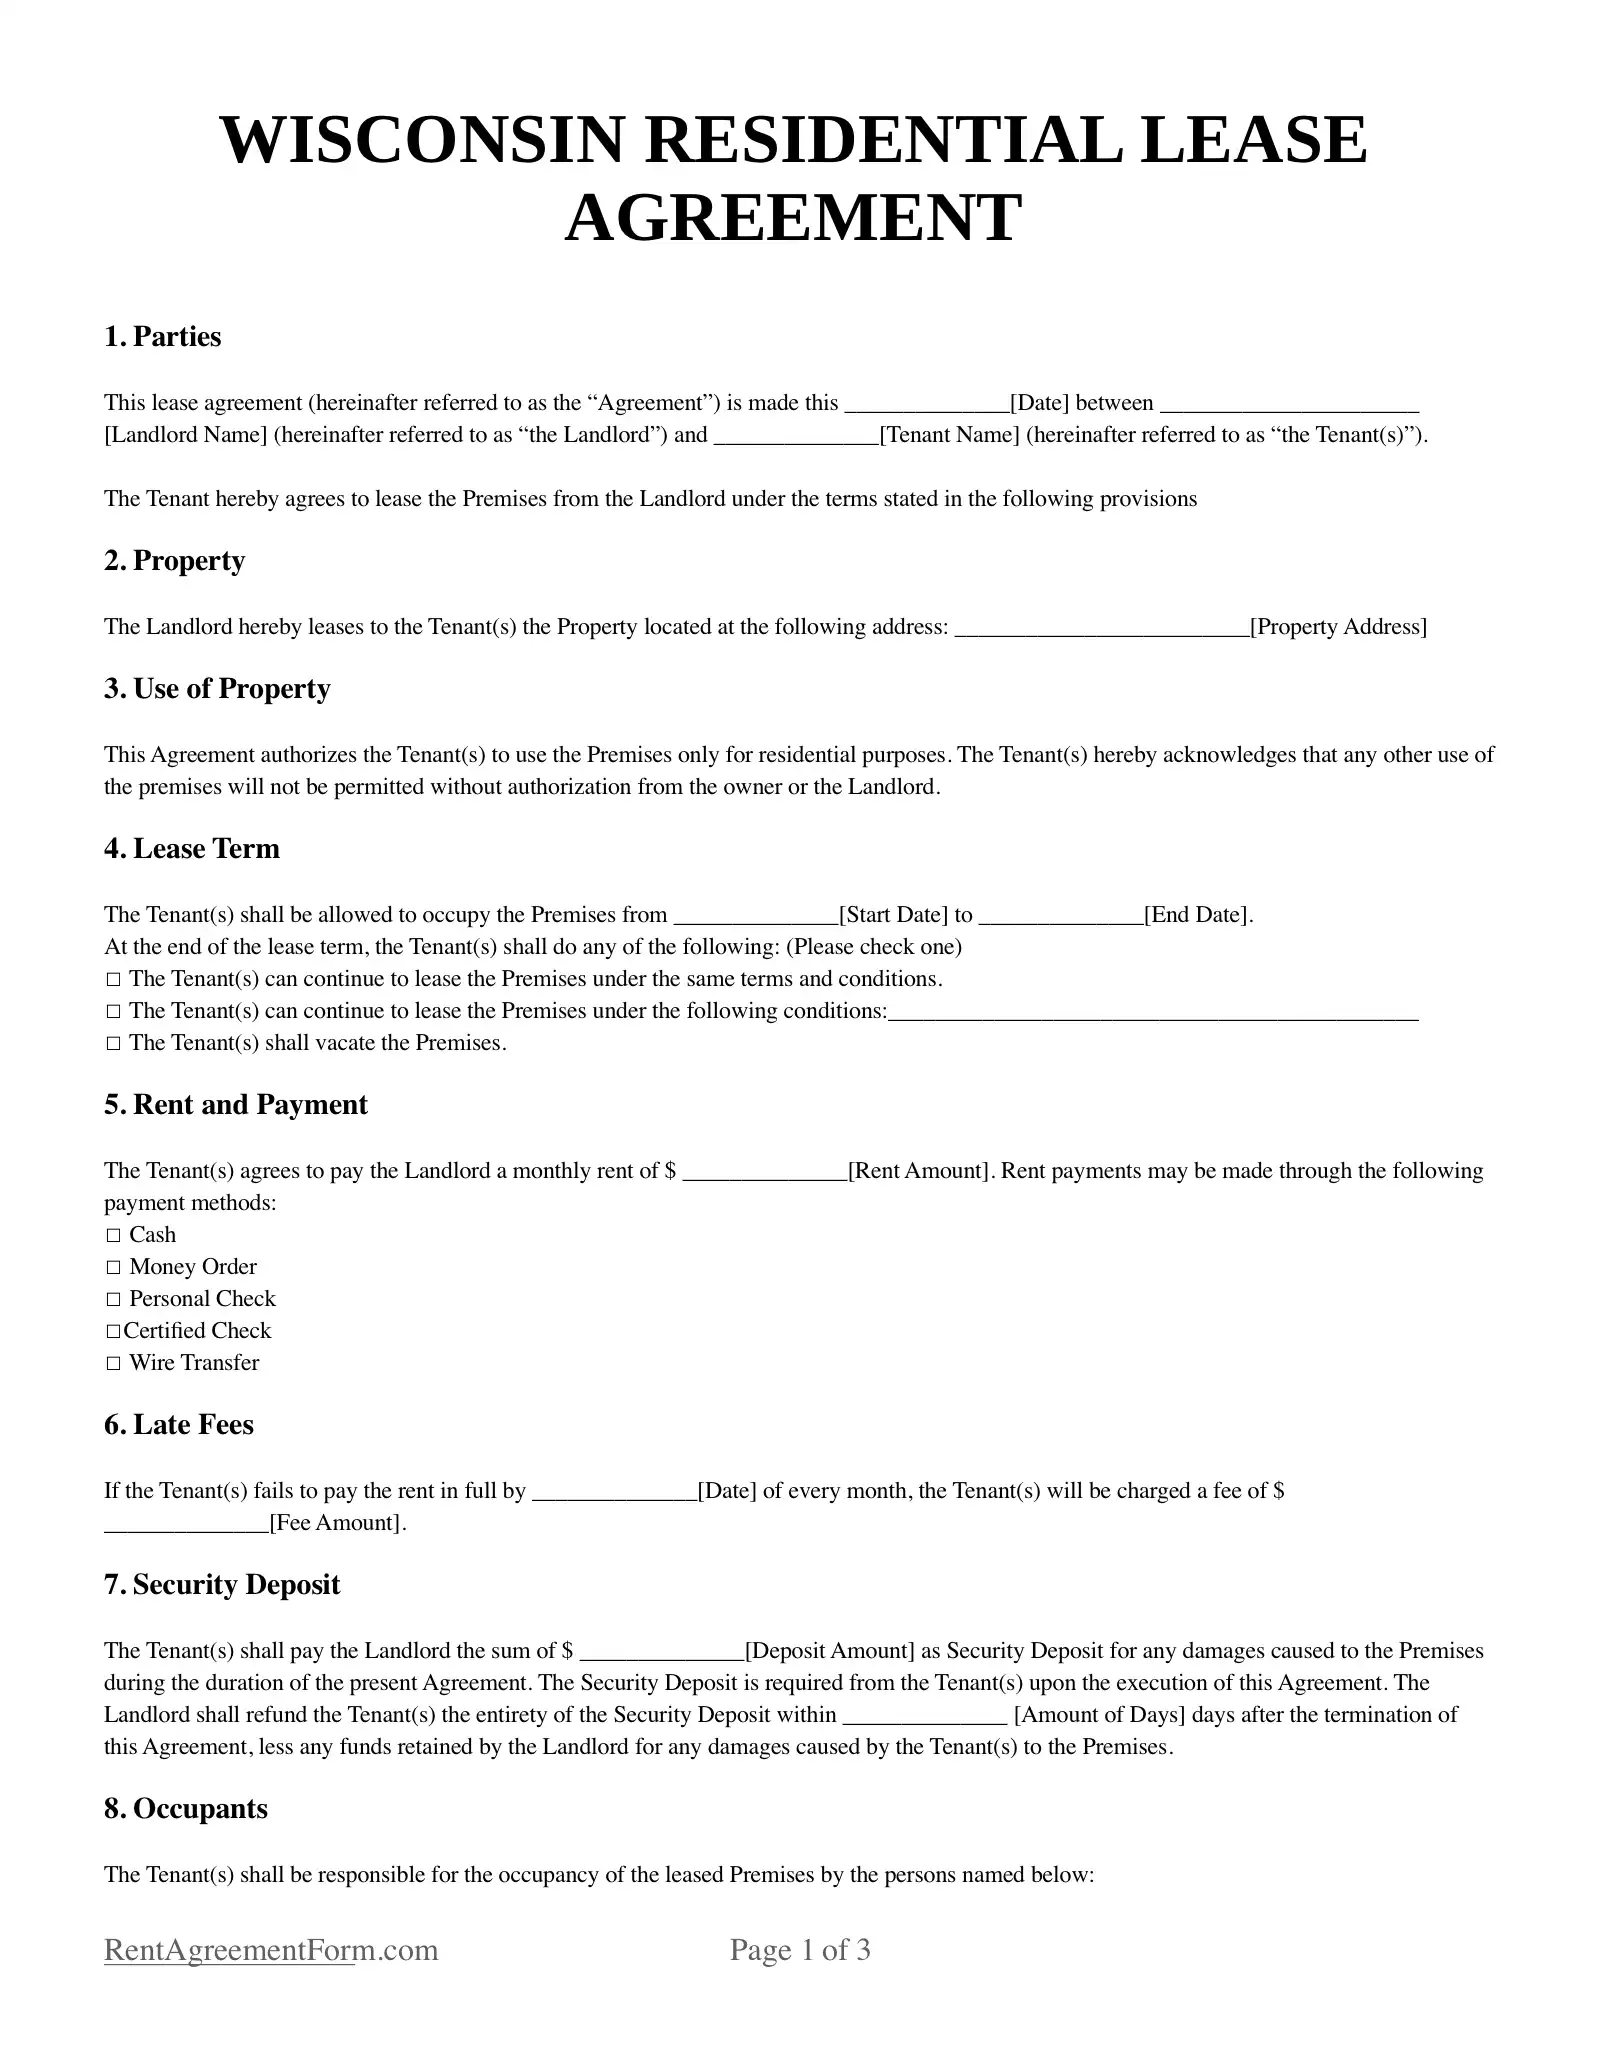 Wisconsin Residential Lease Agreement Sample